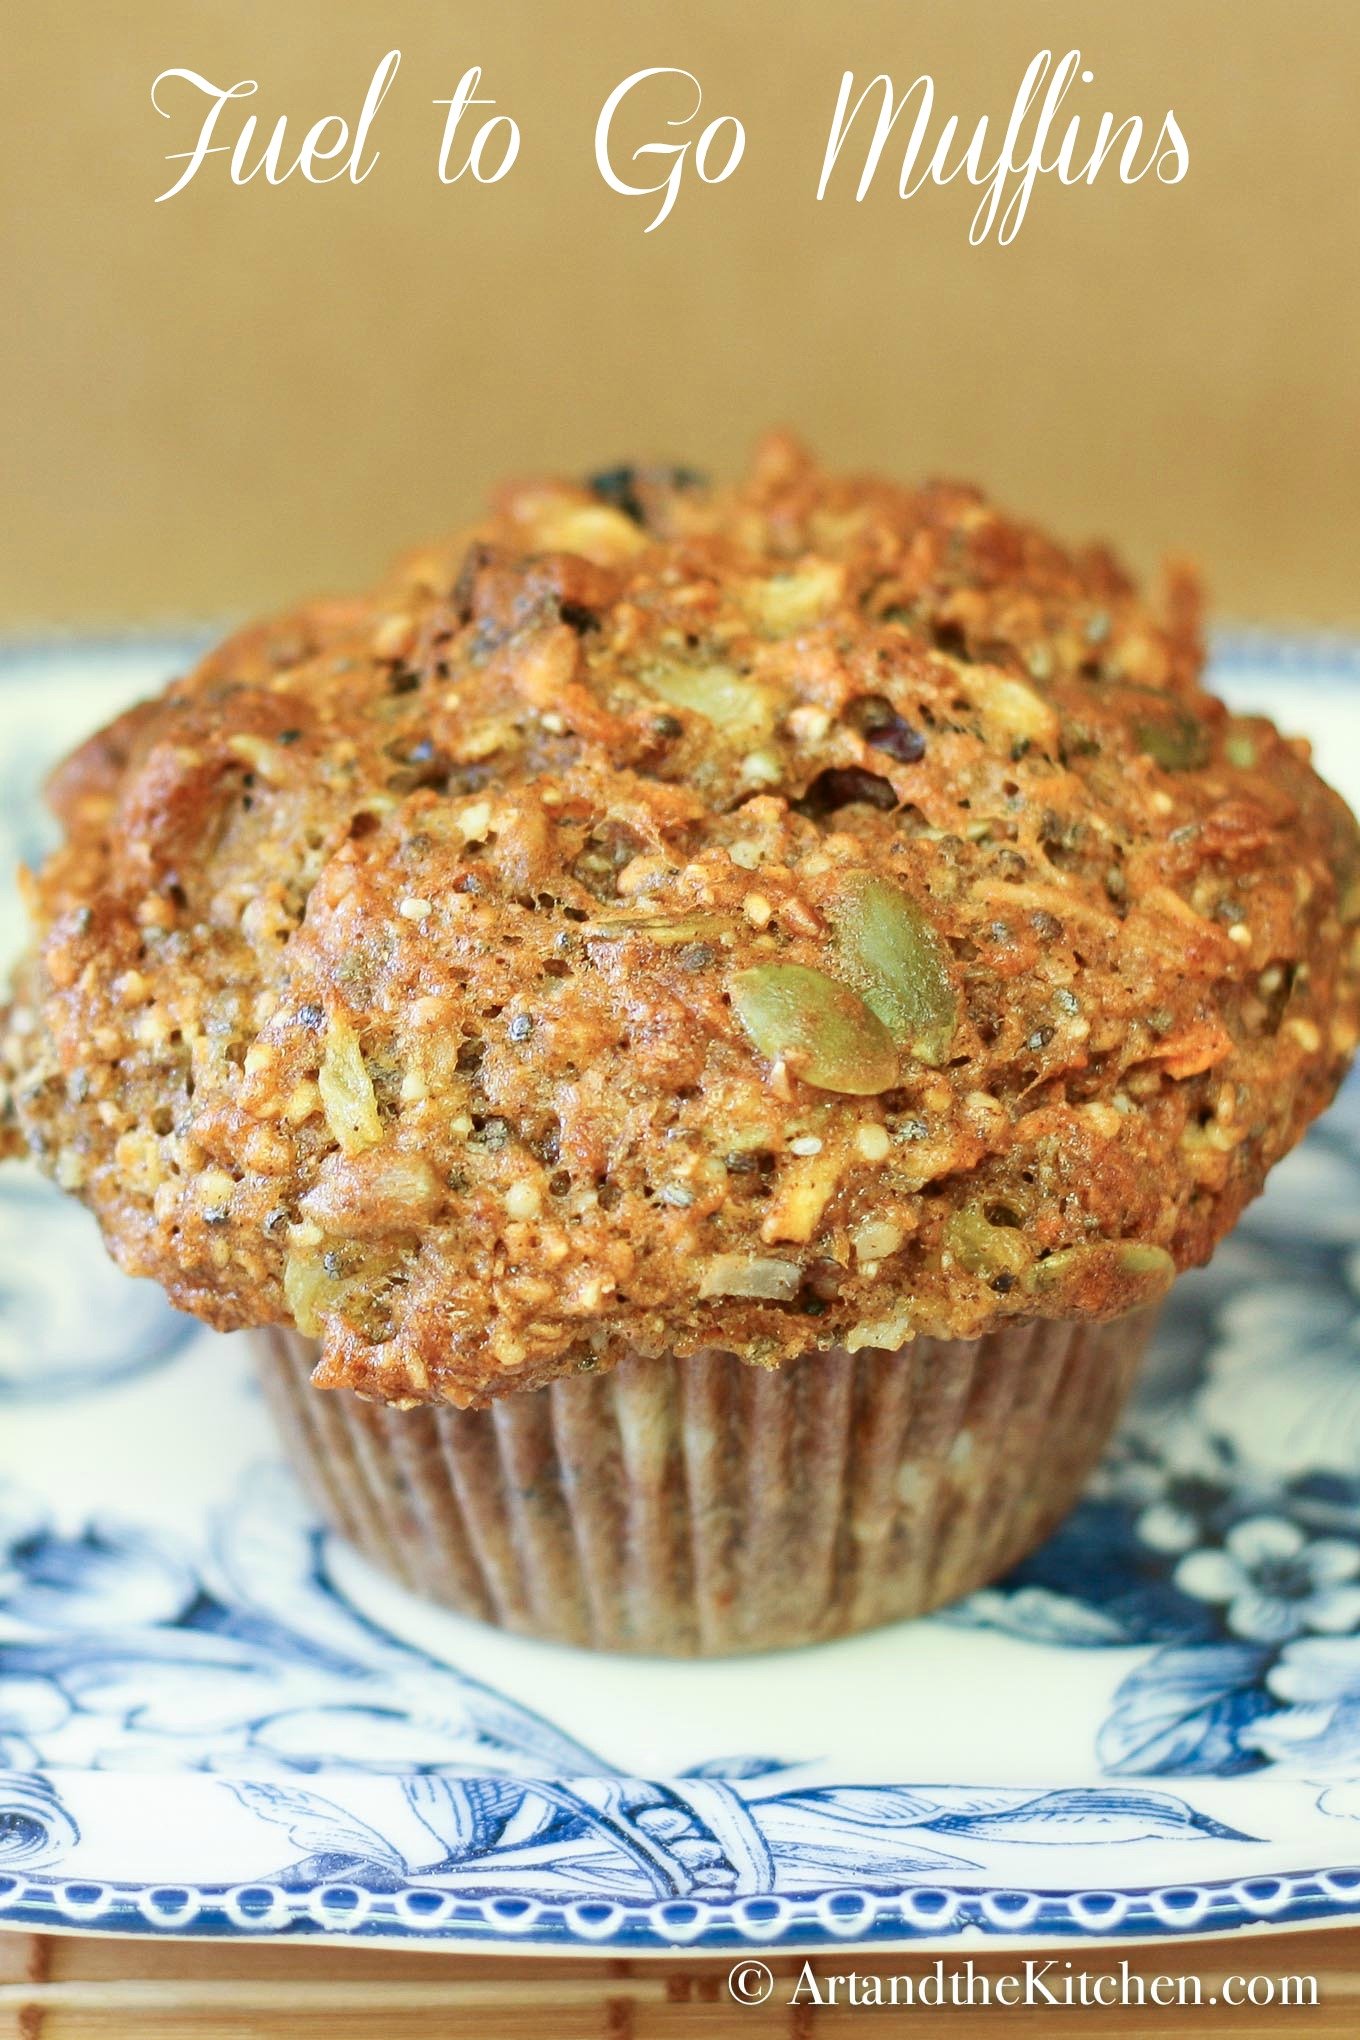 Healthy muffin with whole grains, dried fruit, pumpkin and sunflowers on blue plate.